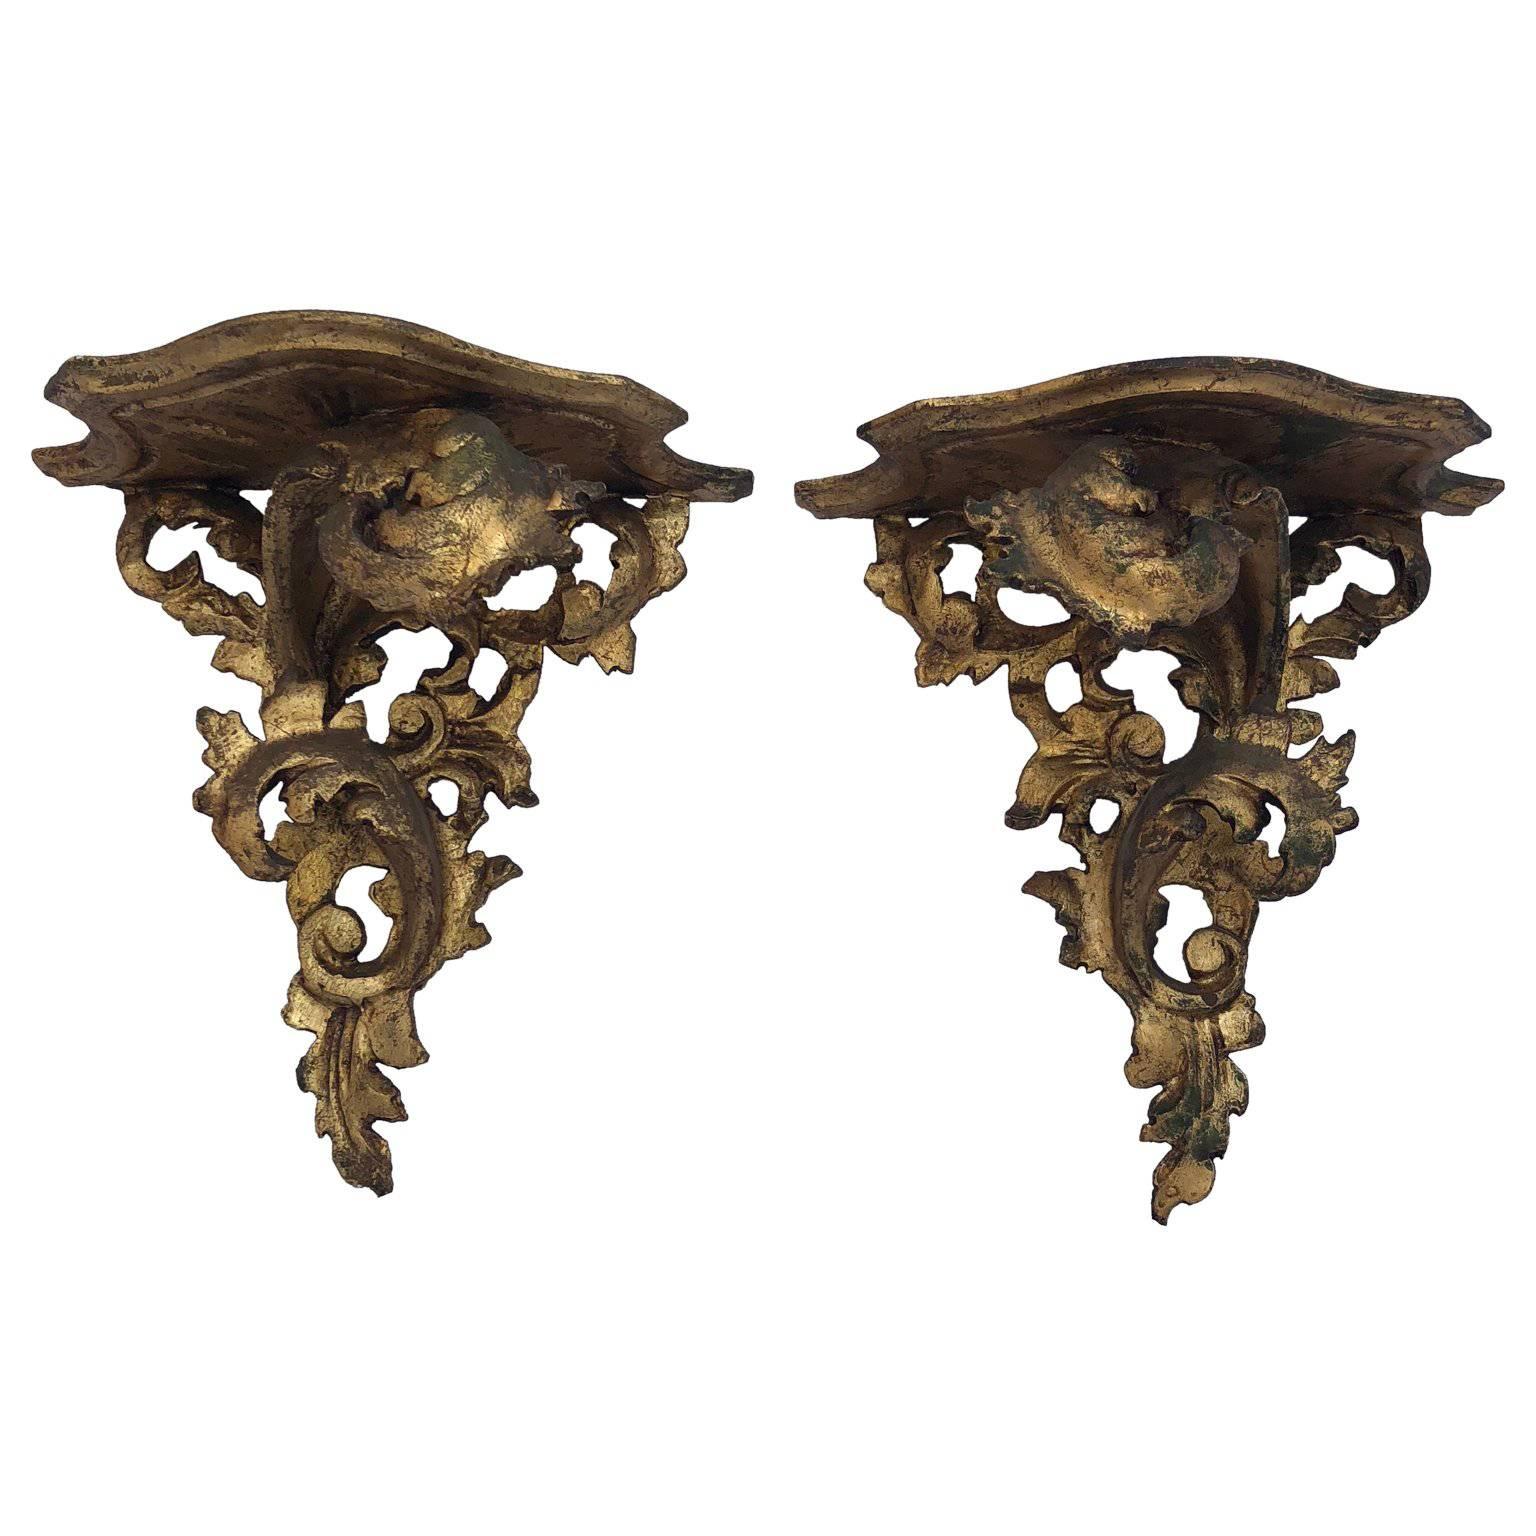 Pair of Italian Carved Wood Rococo Style Shelves or Brackets